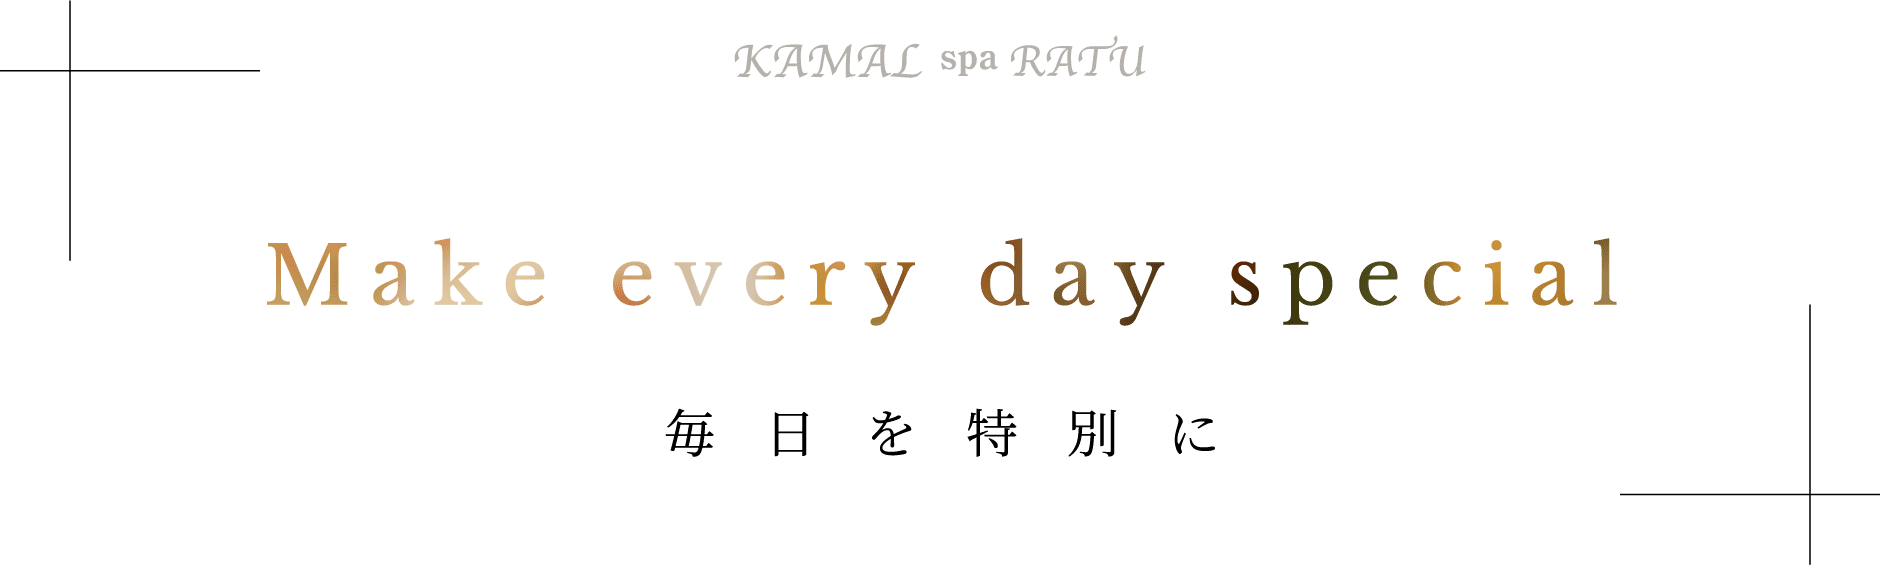 Make every day special 毎日を特別に